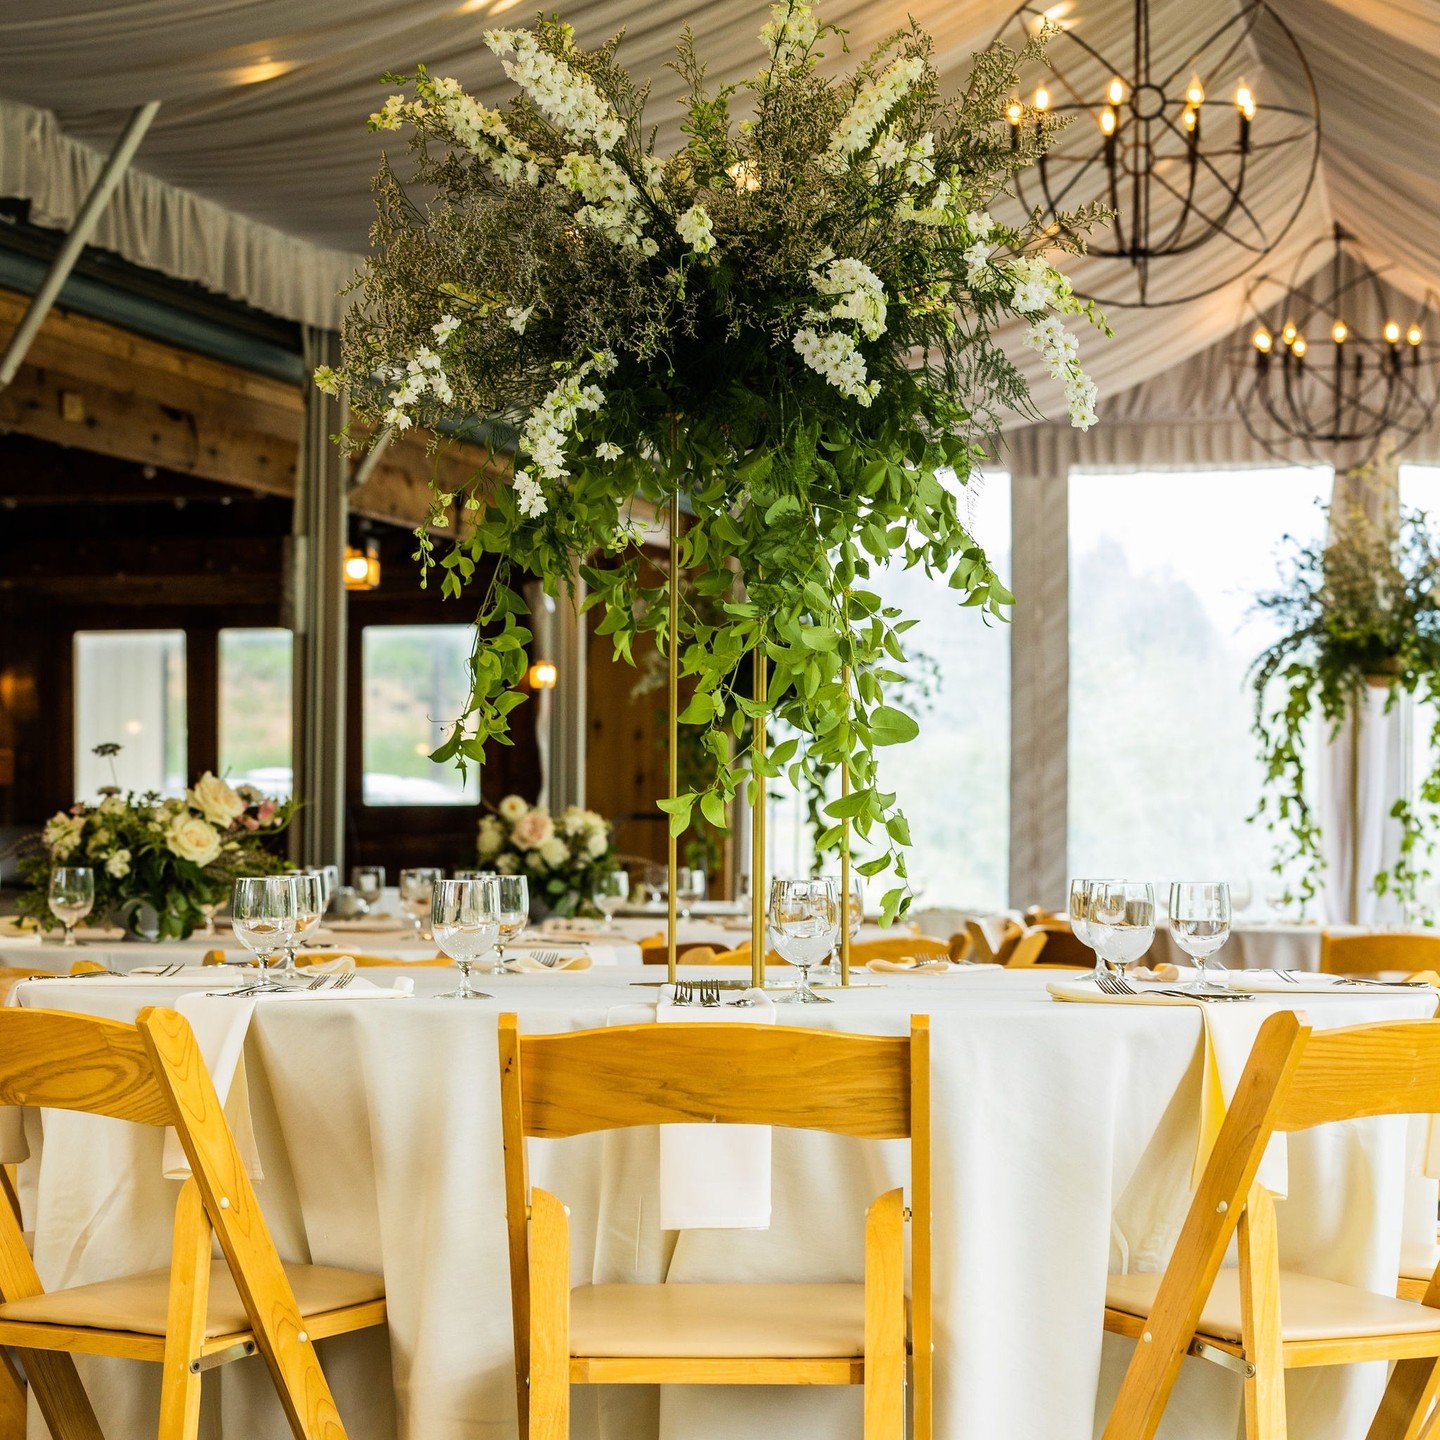 Happy Friday! Lets talk about dimension shall we? I love a good high-low reception setup with about 30% elevated centerpieces and 70% low. This invites your guests to really admire the space and take it in on another level (not to mention being uniqu